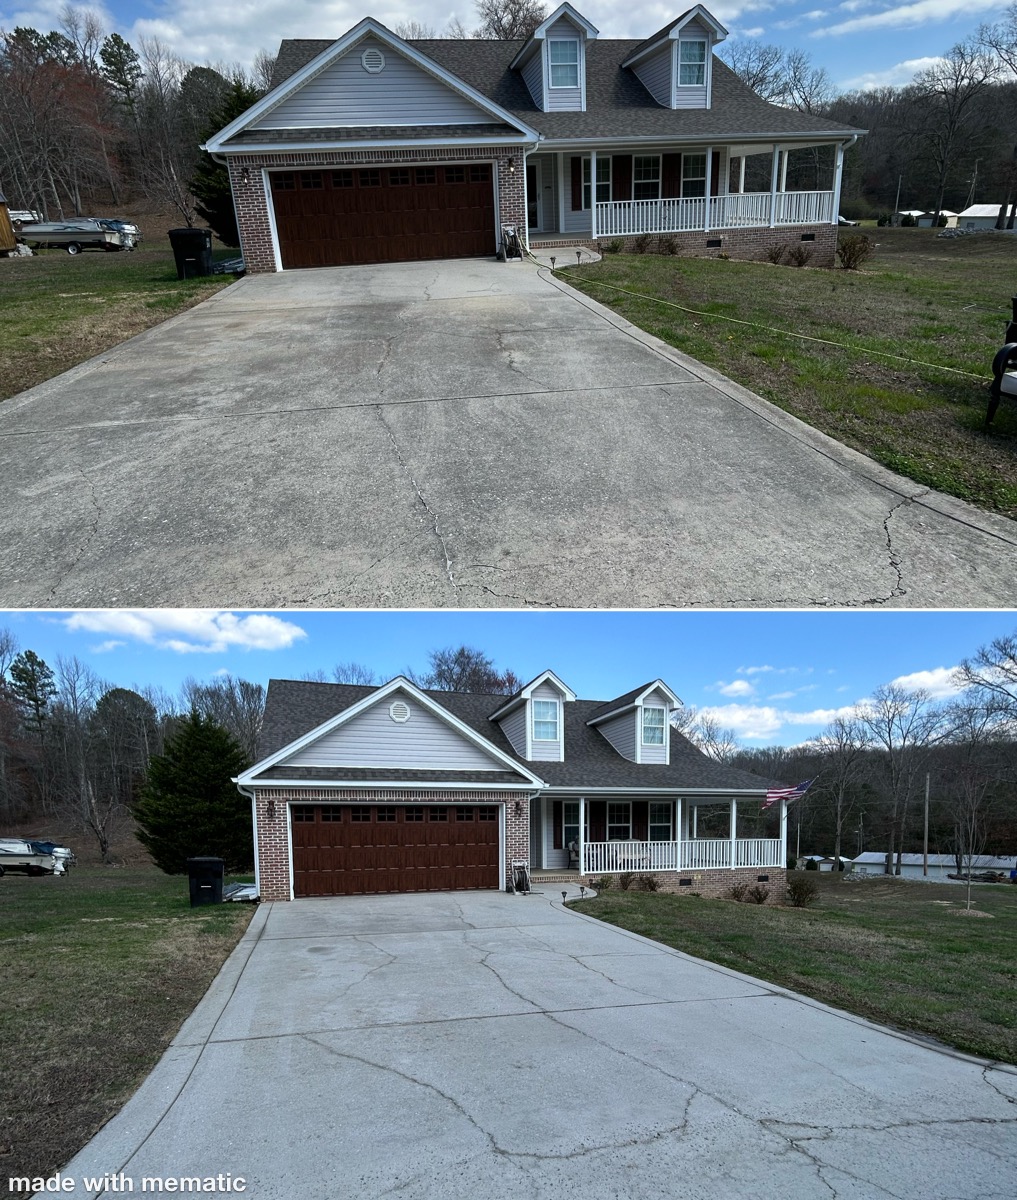 House Wash and Driveway Cleaning in Soddy Daisy, TN